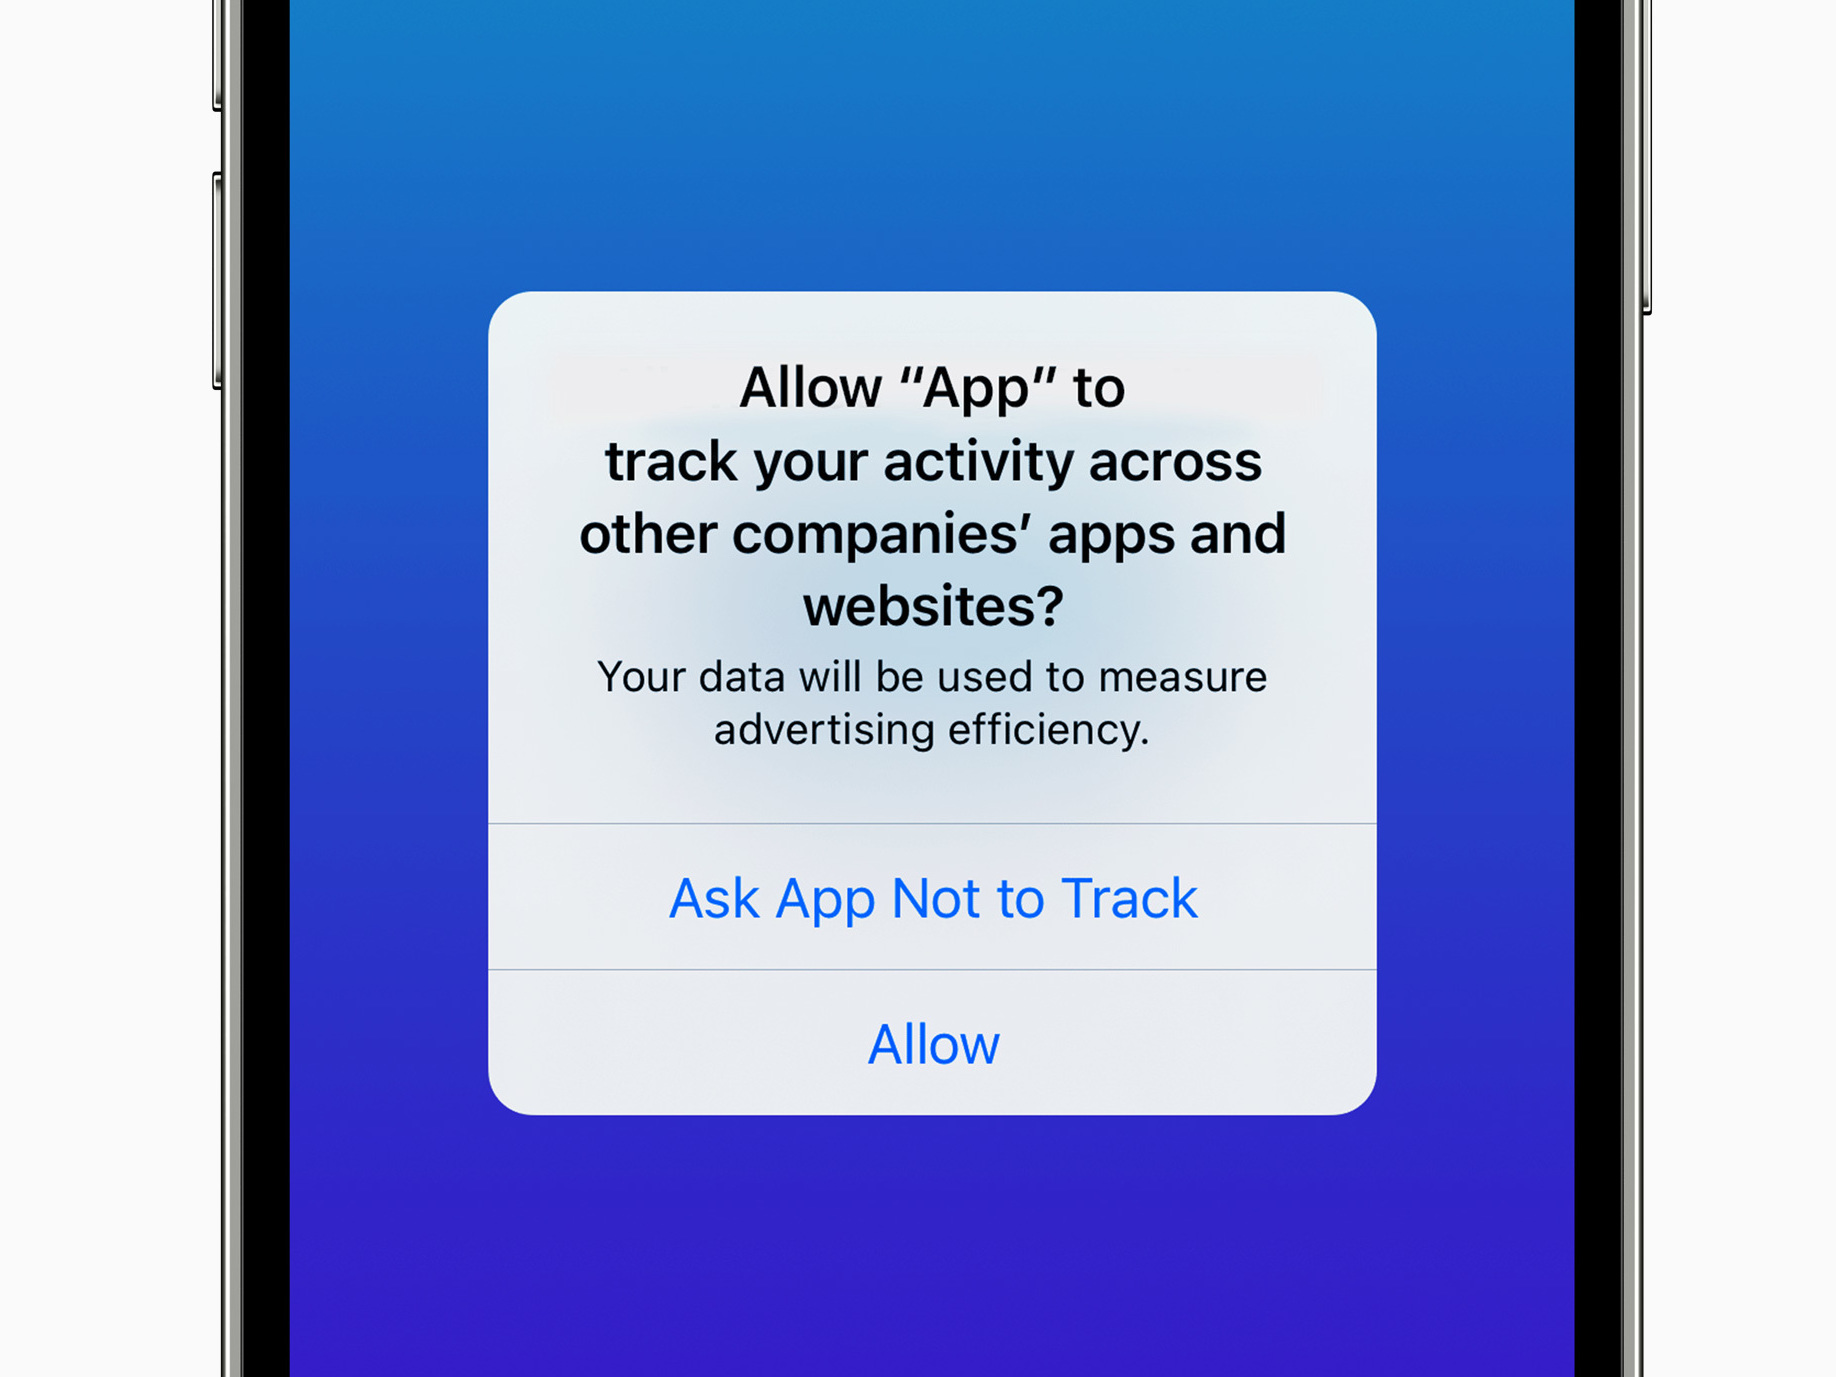 Apple’s app tracking policy cost $10 billion for social media platforms